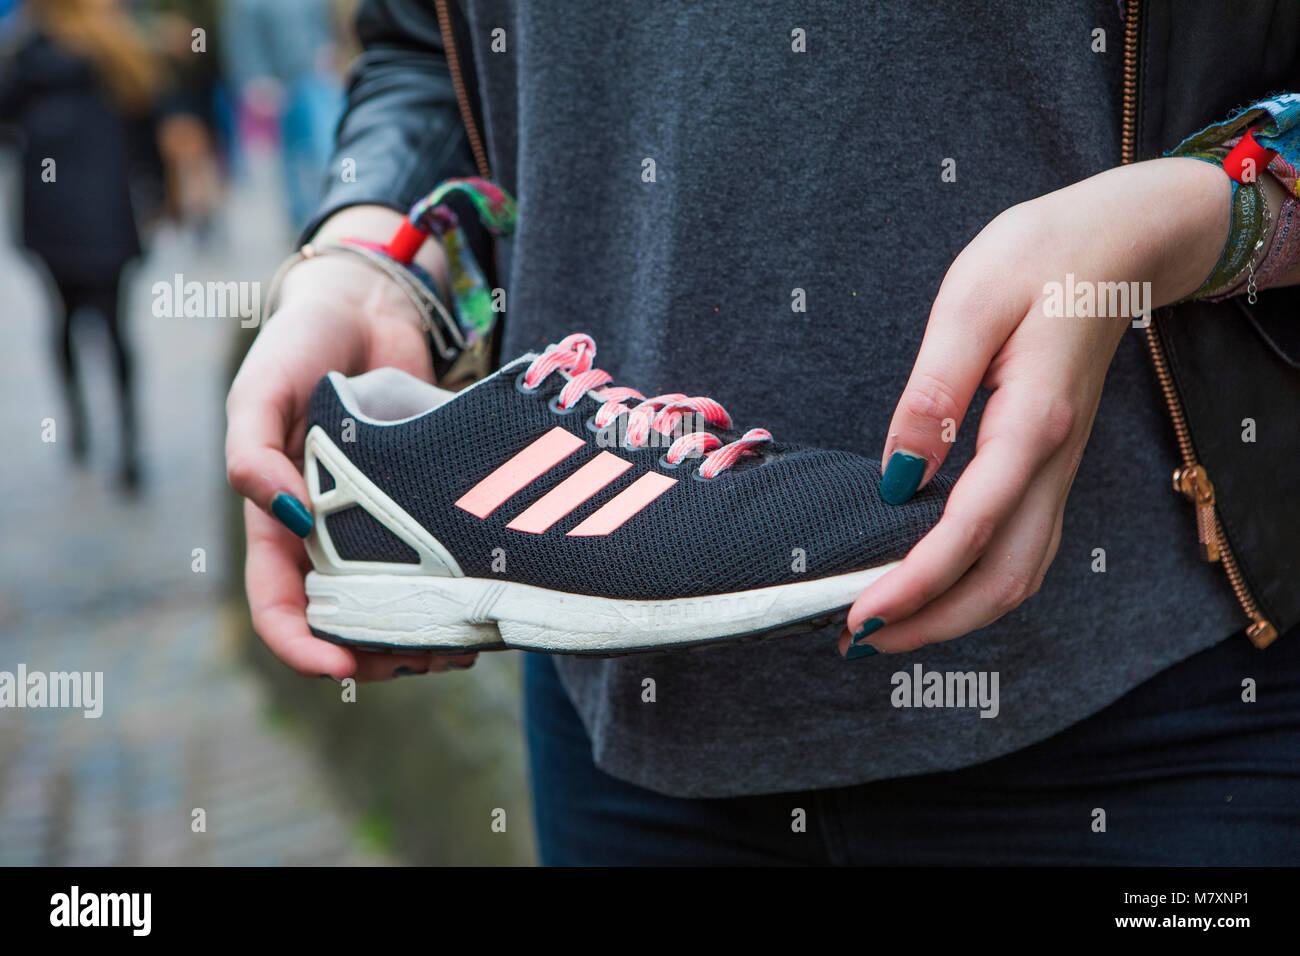 grey adidas trainers with pink stripes